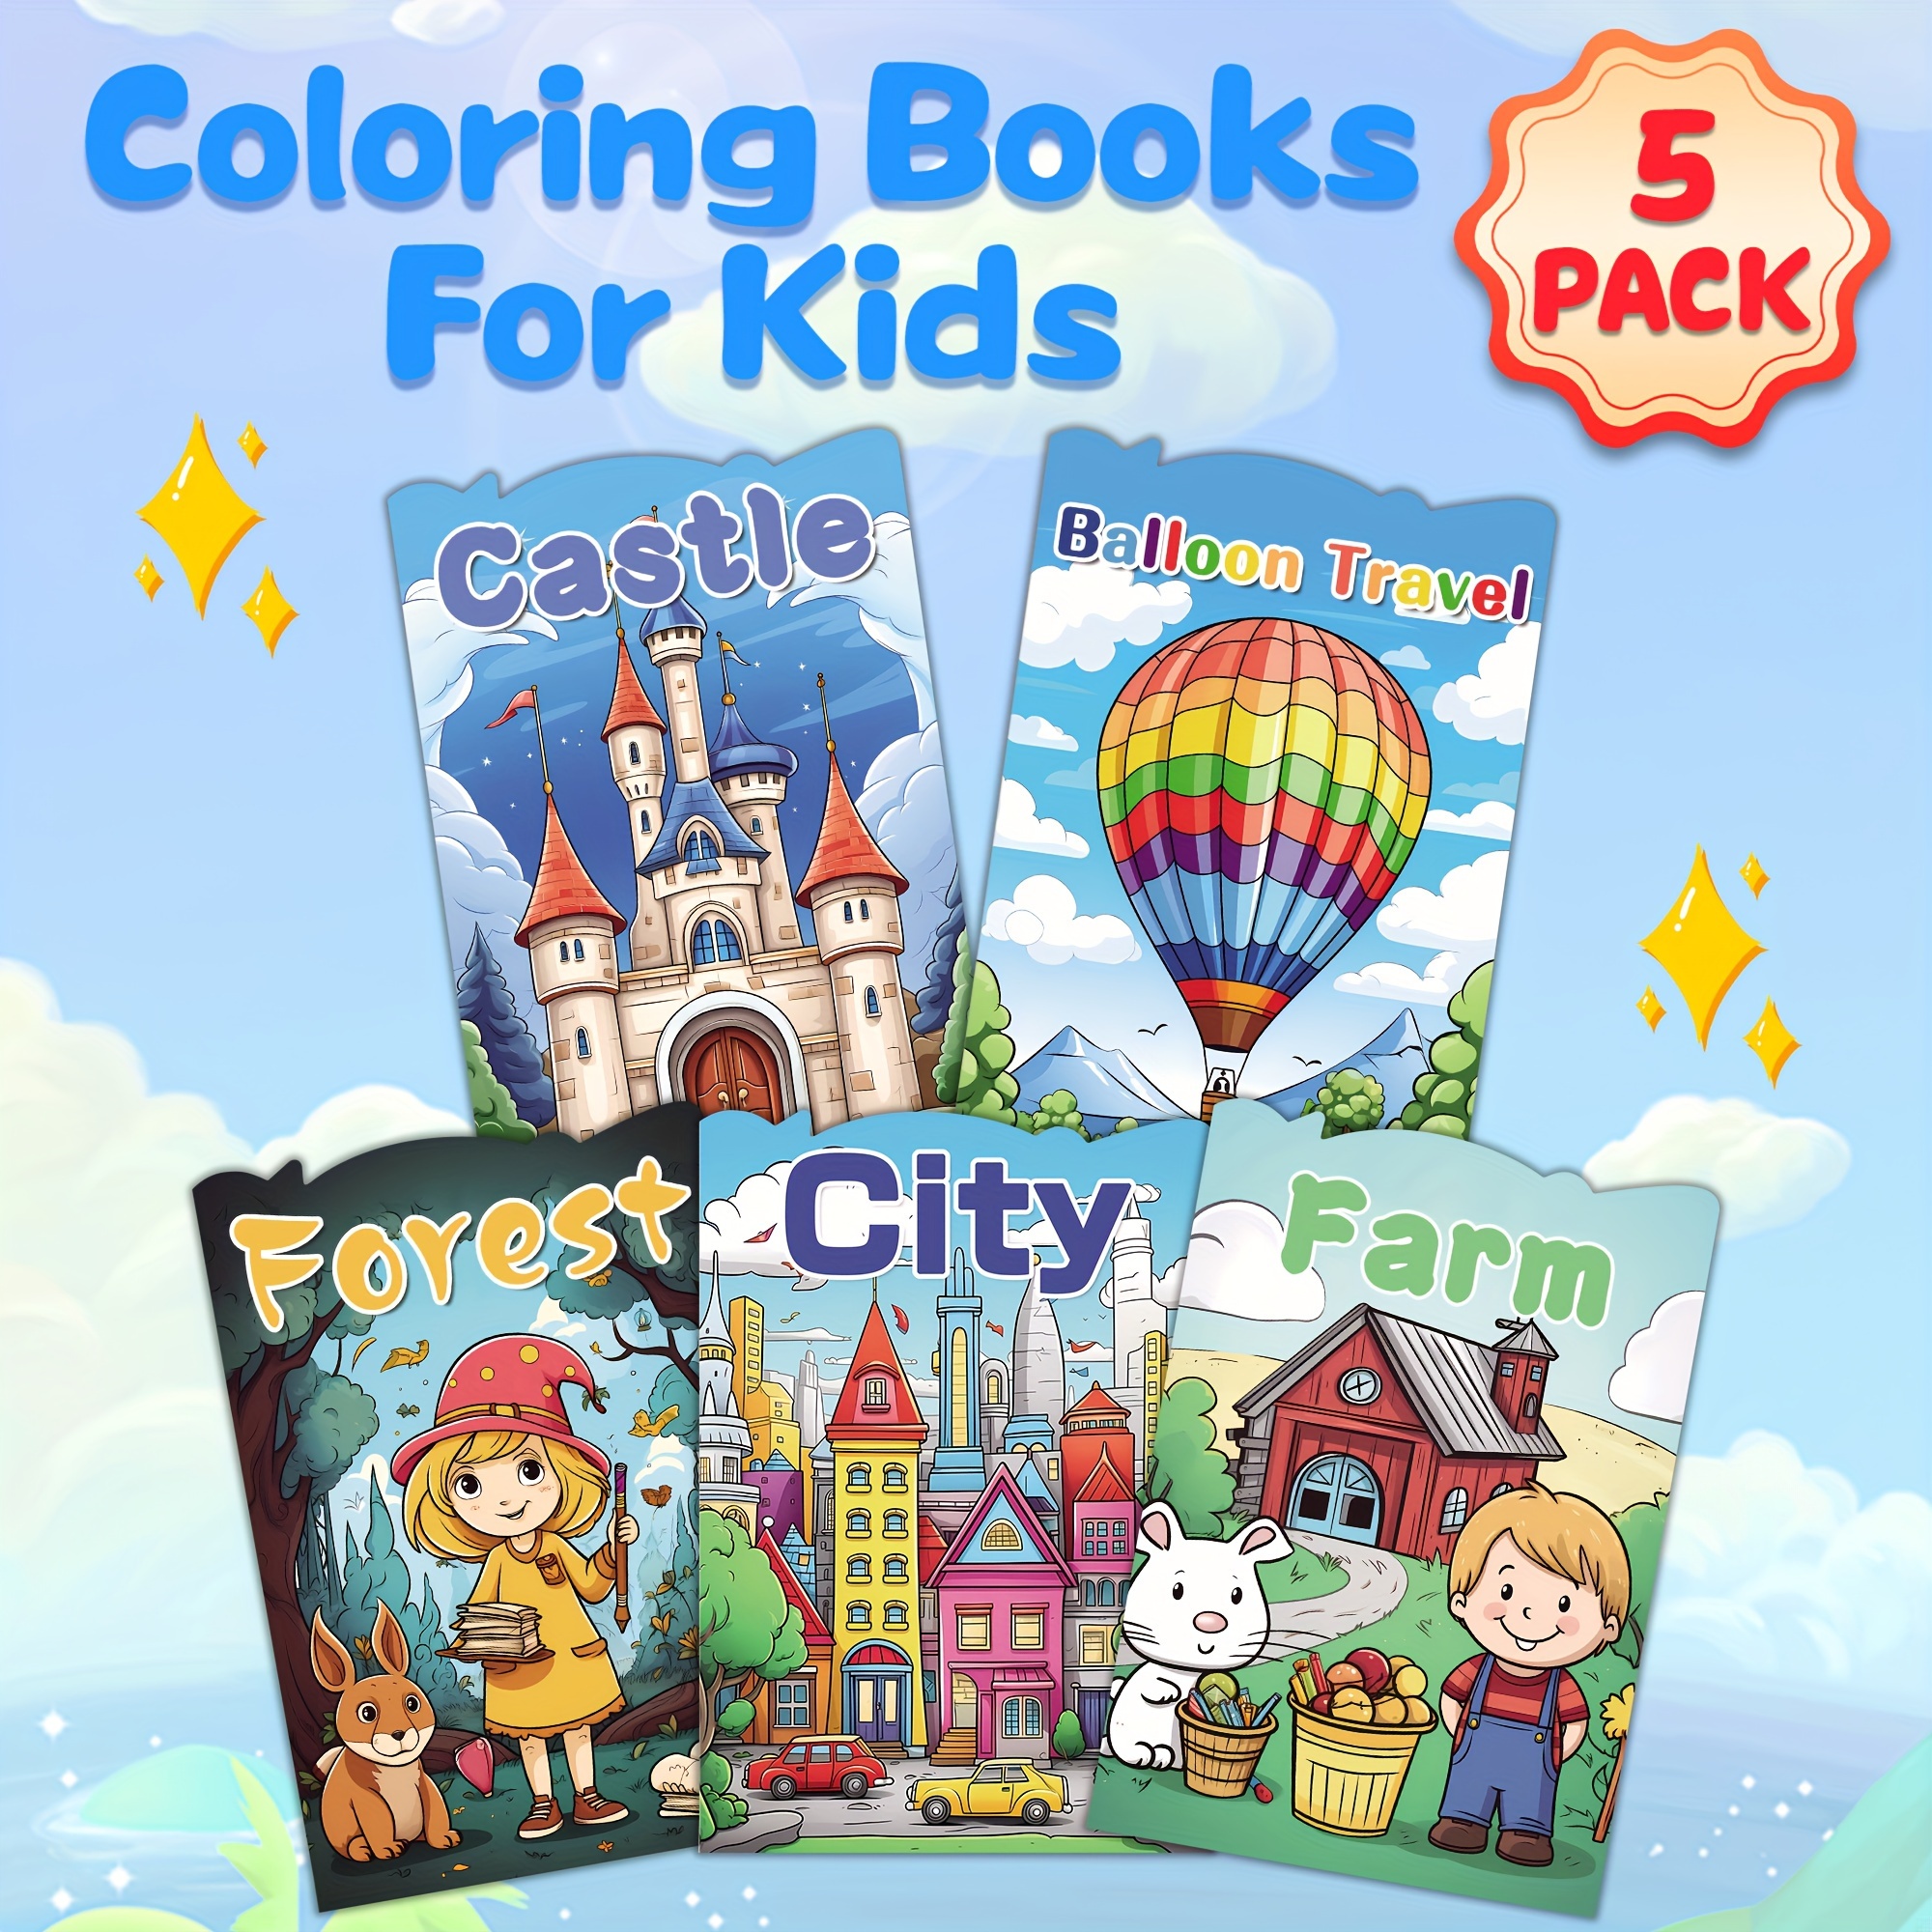 

5-pack Kids Coloring Books Set - Themes Include Castle, Balloon Travel, Forest, City, Farm - Educational & Fun For Ages 3+ Boys & Girls